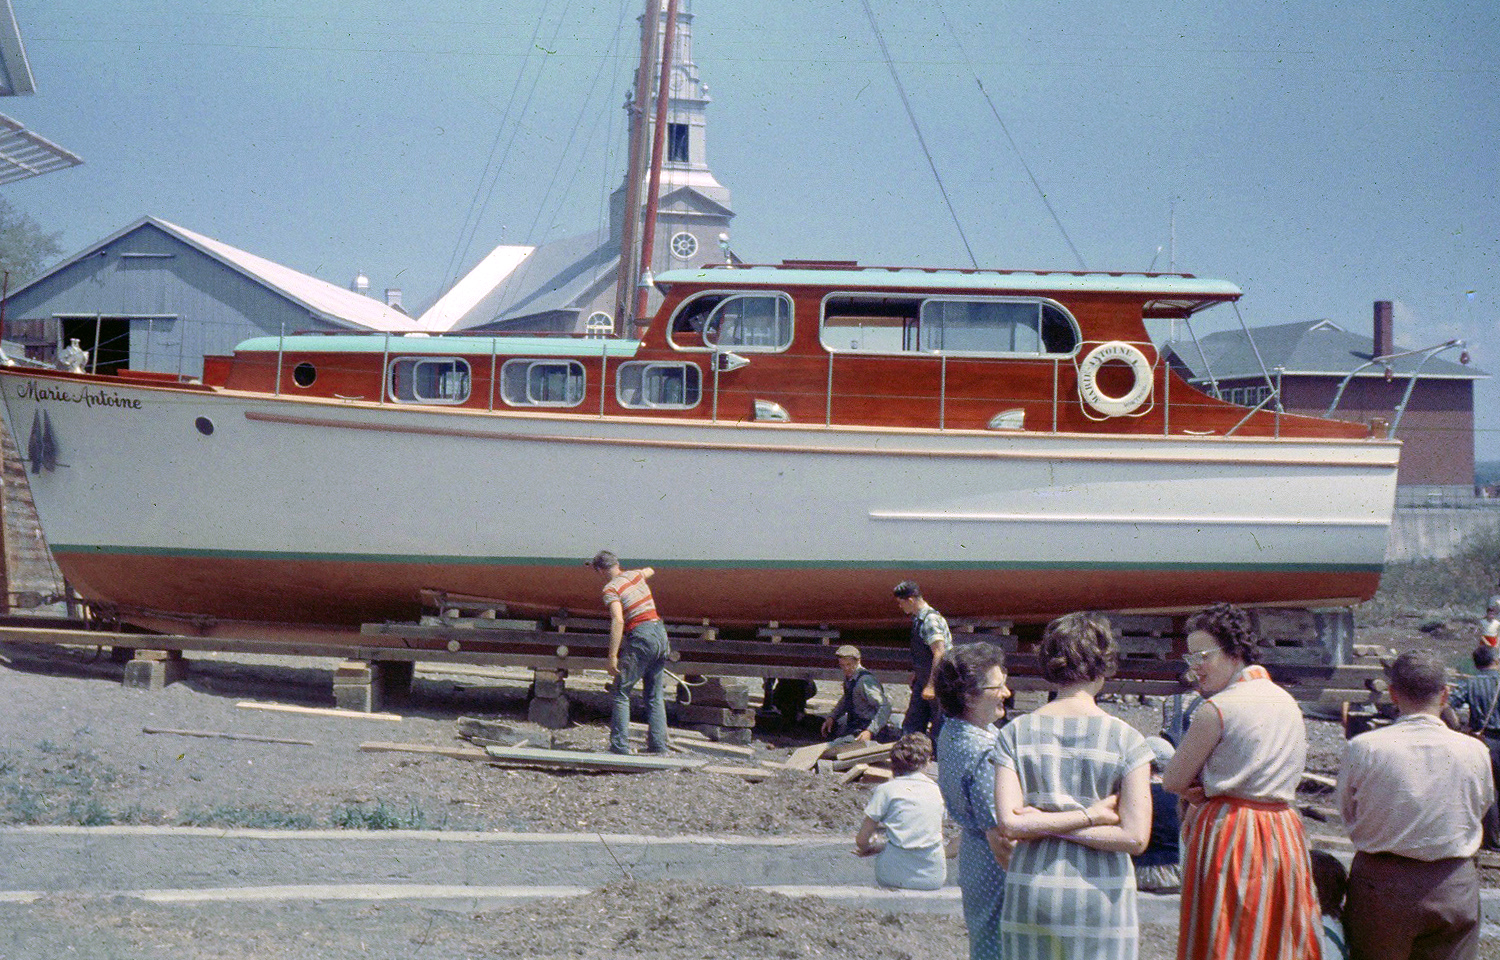 Color photograph where a wooden cruiser yacht painted in white, whose cabin is in mahogany, is installed on blocks and boards. The boat is shown in profile, with a church and a shed in the background. The inscription "Marie-Antoine" is at the front of the boat. Three men work on the structure under the boat. Three women discuss in the foreground. A man watches the scene.